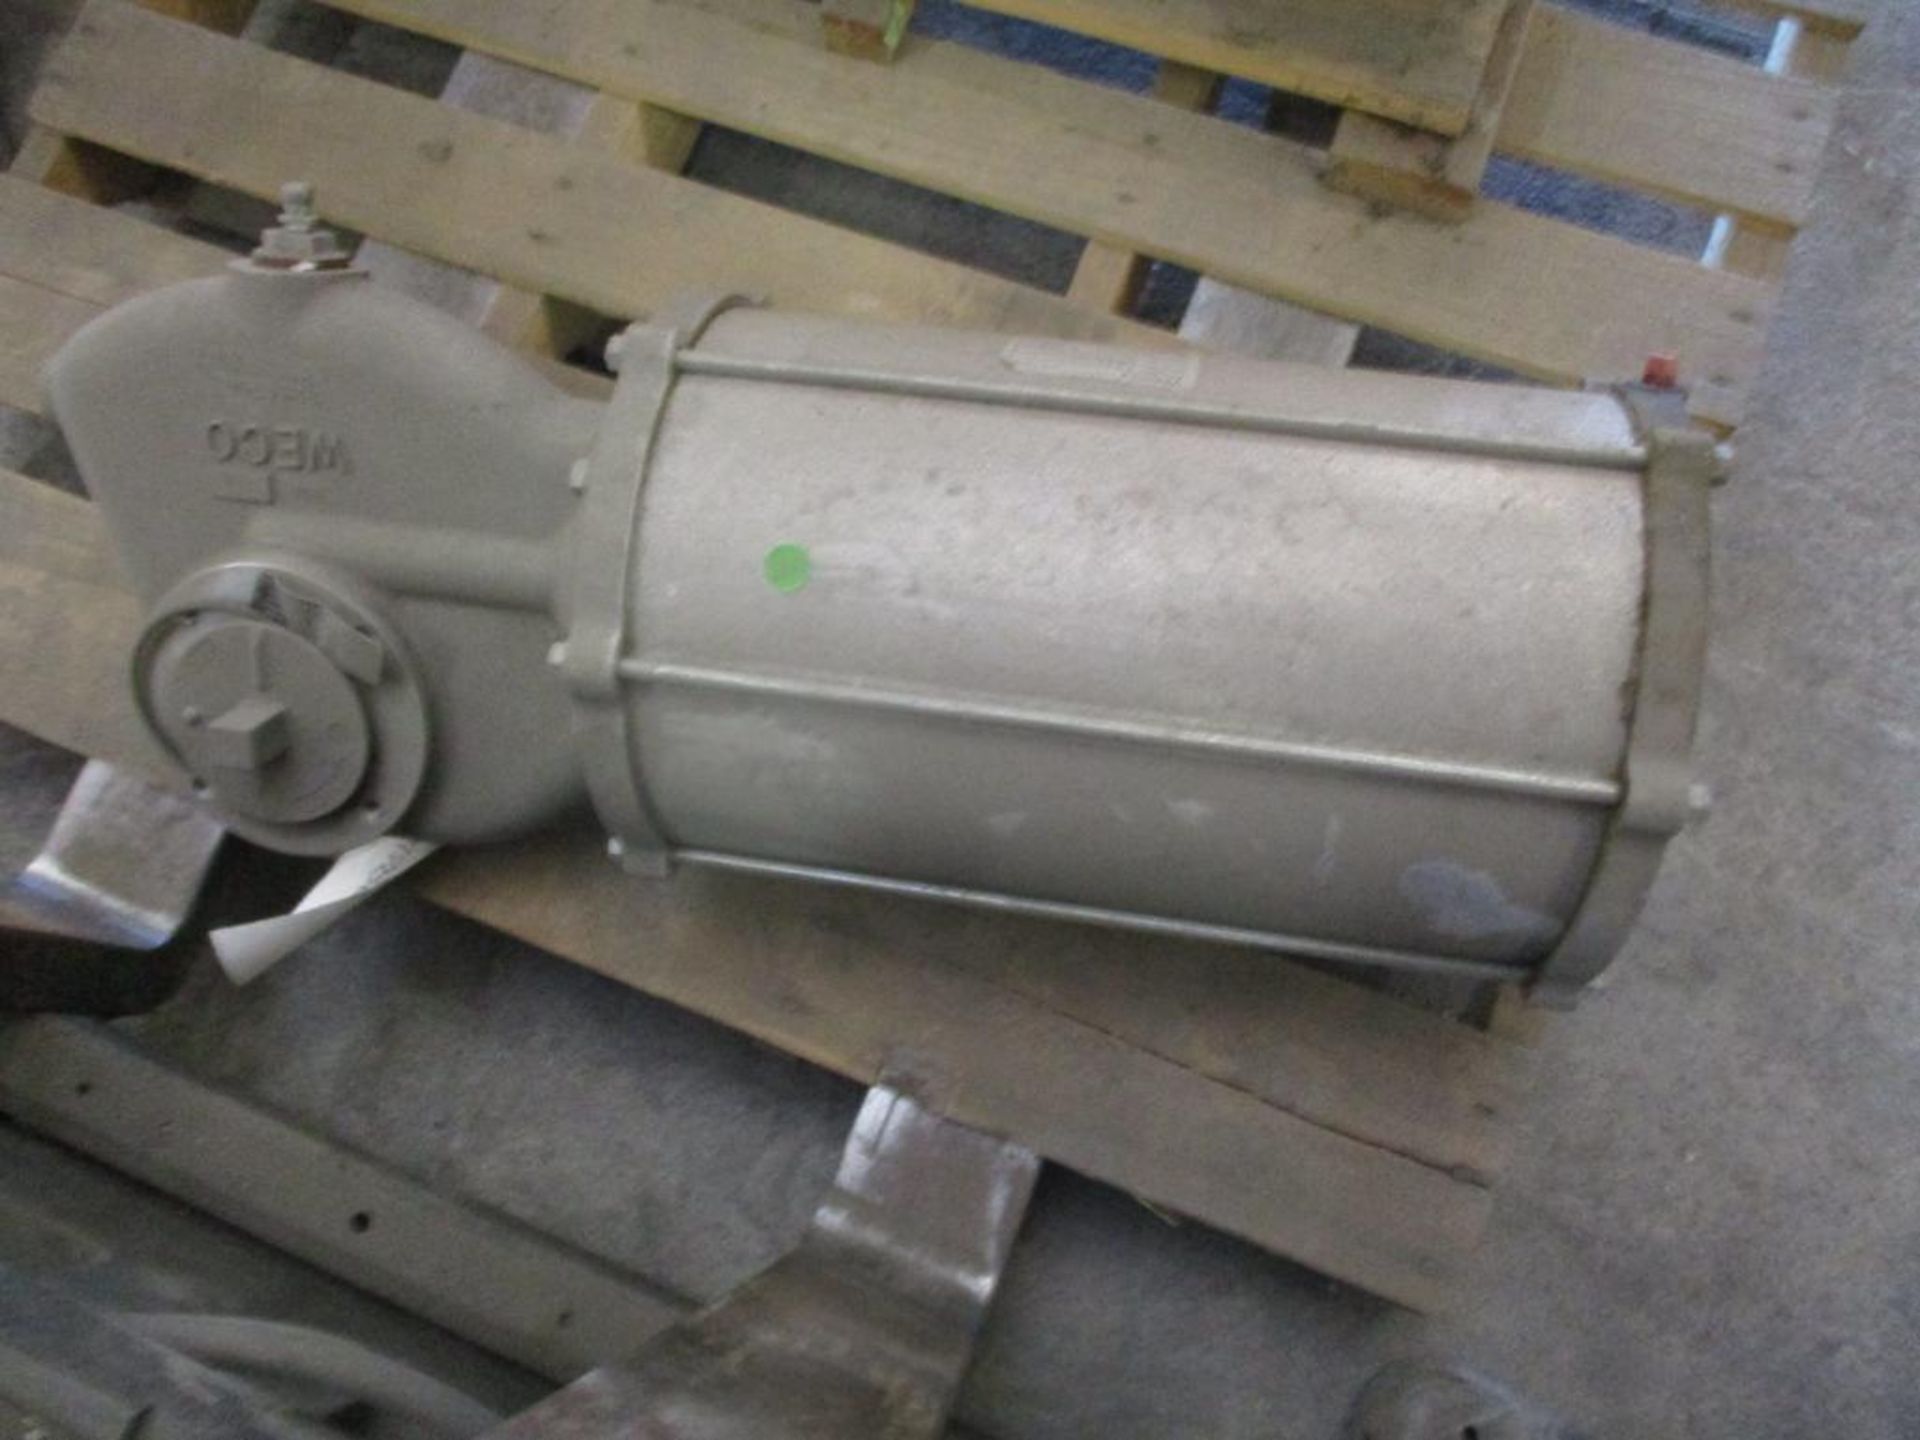 Emerson 07E3D 7.50 HP Motor, 254T Frame, 3-PH, 1180 RPM, Model S574, FMC Weco Actuator - Image 2 of 4